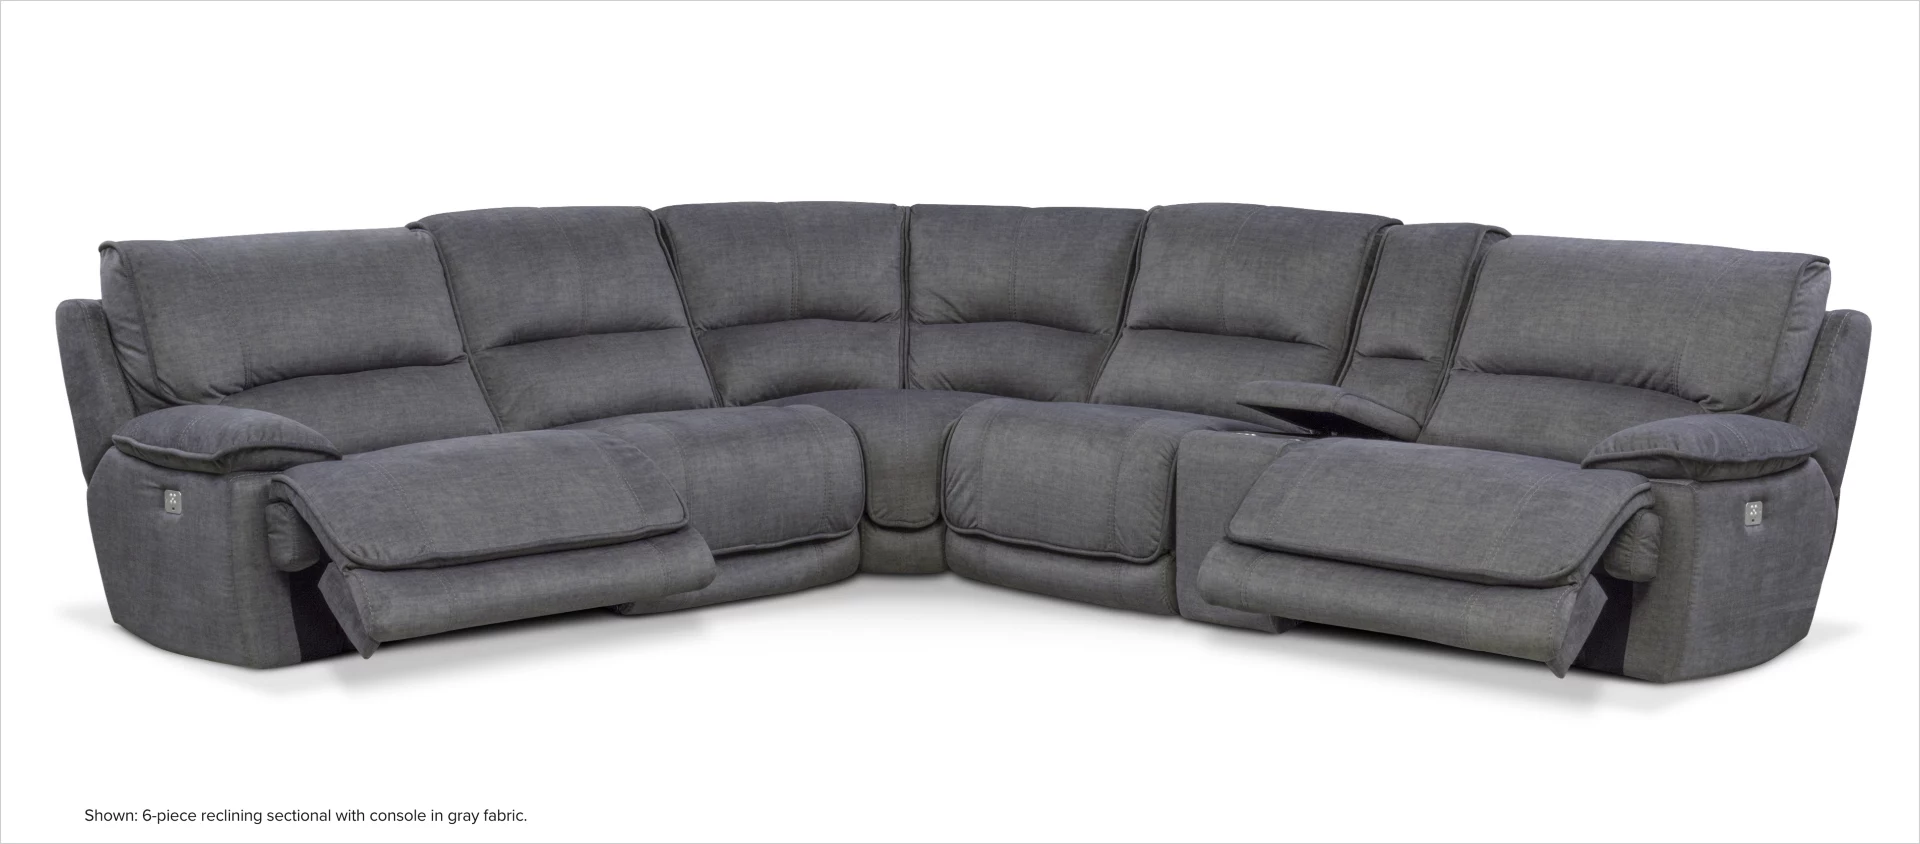 Mario 6-piece reclining sectional with console in gray fabric. 